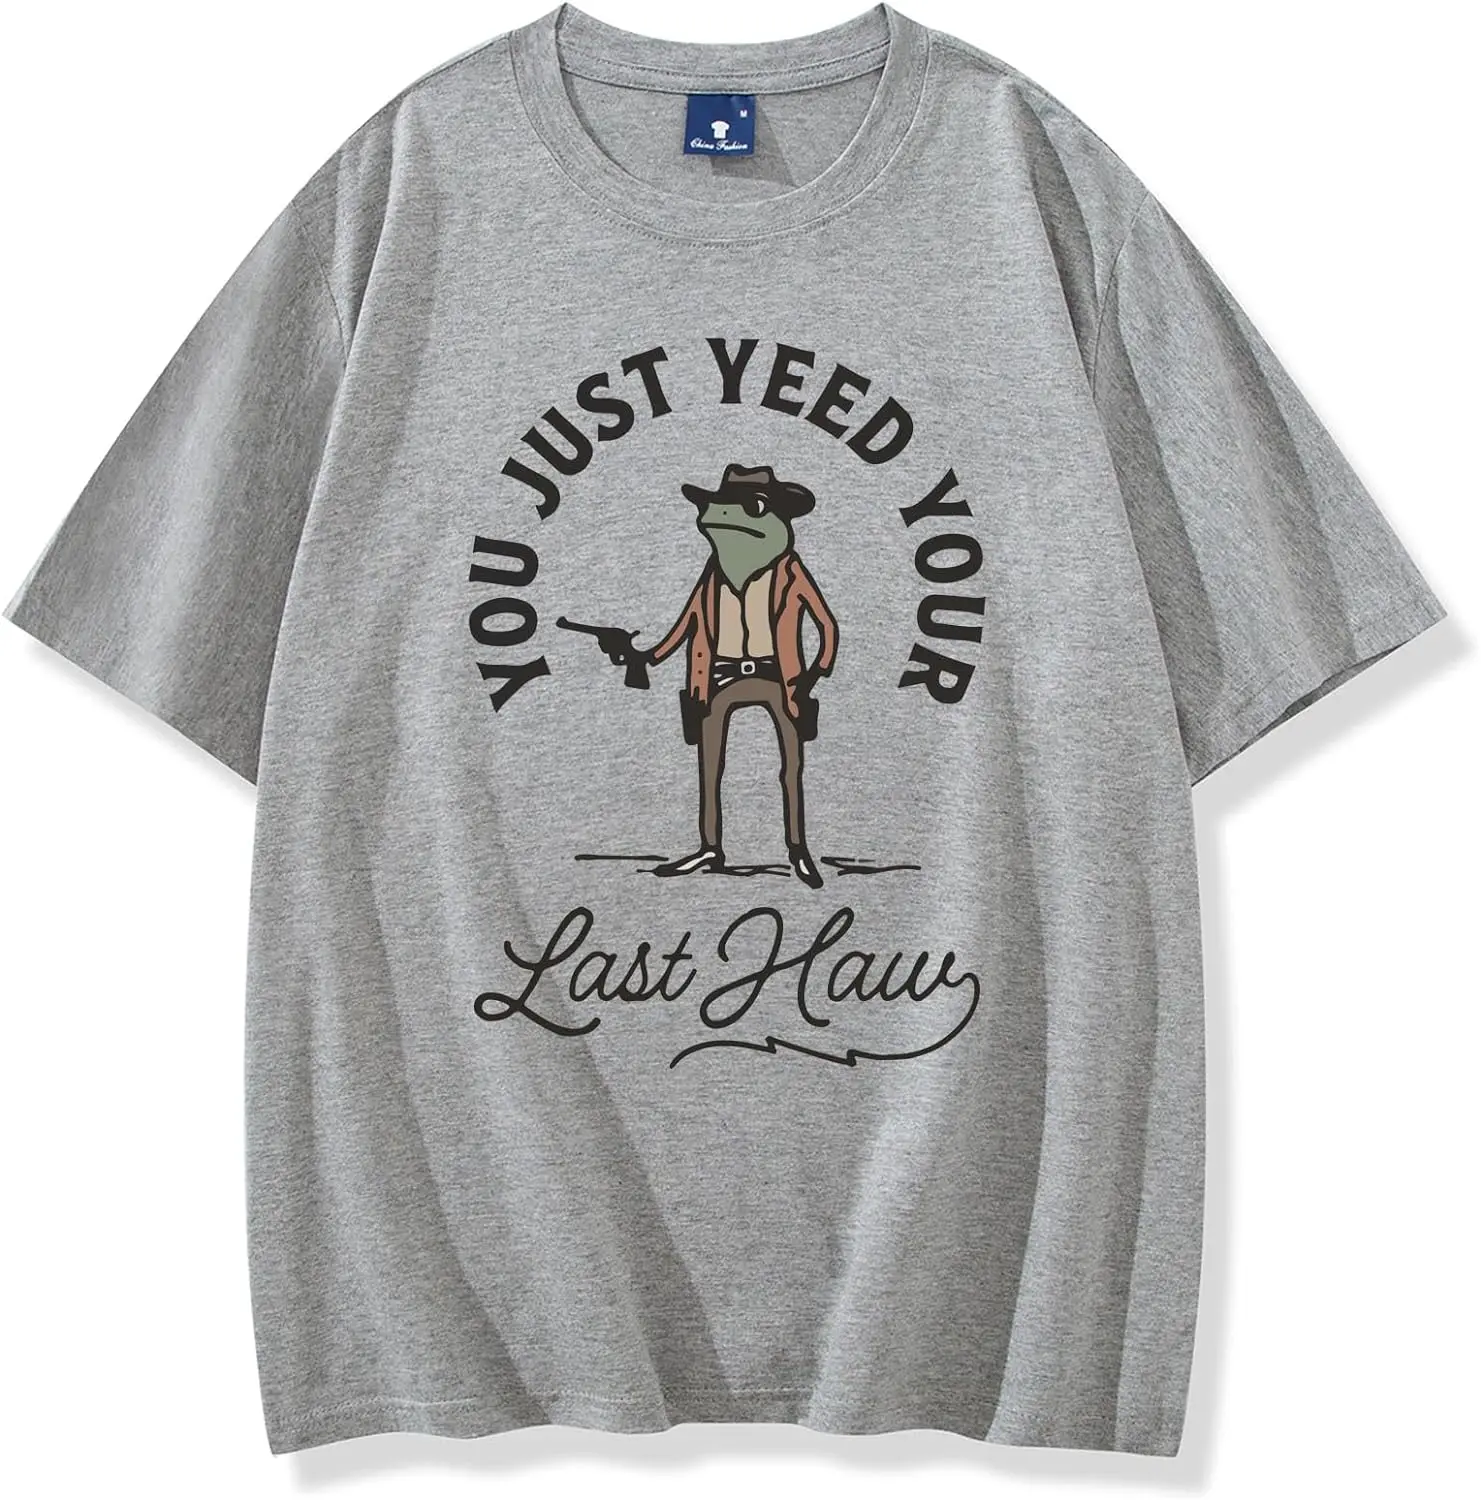 

You Just Yee'd Your Last Haw T-Shirt, You Just Yeed Your Last Haw Shirt, Funny Cowboy Frog Shirt